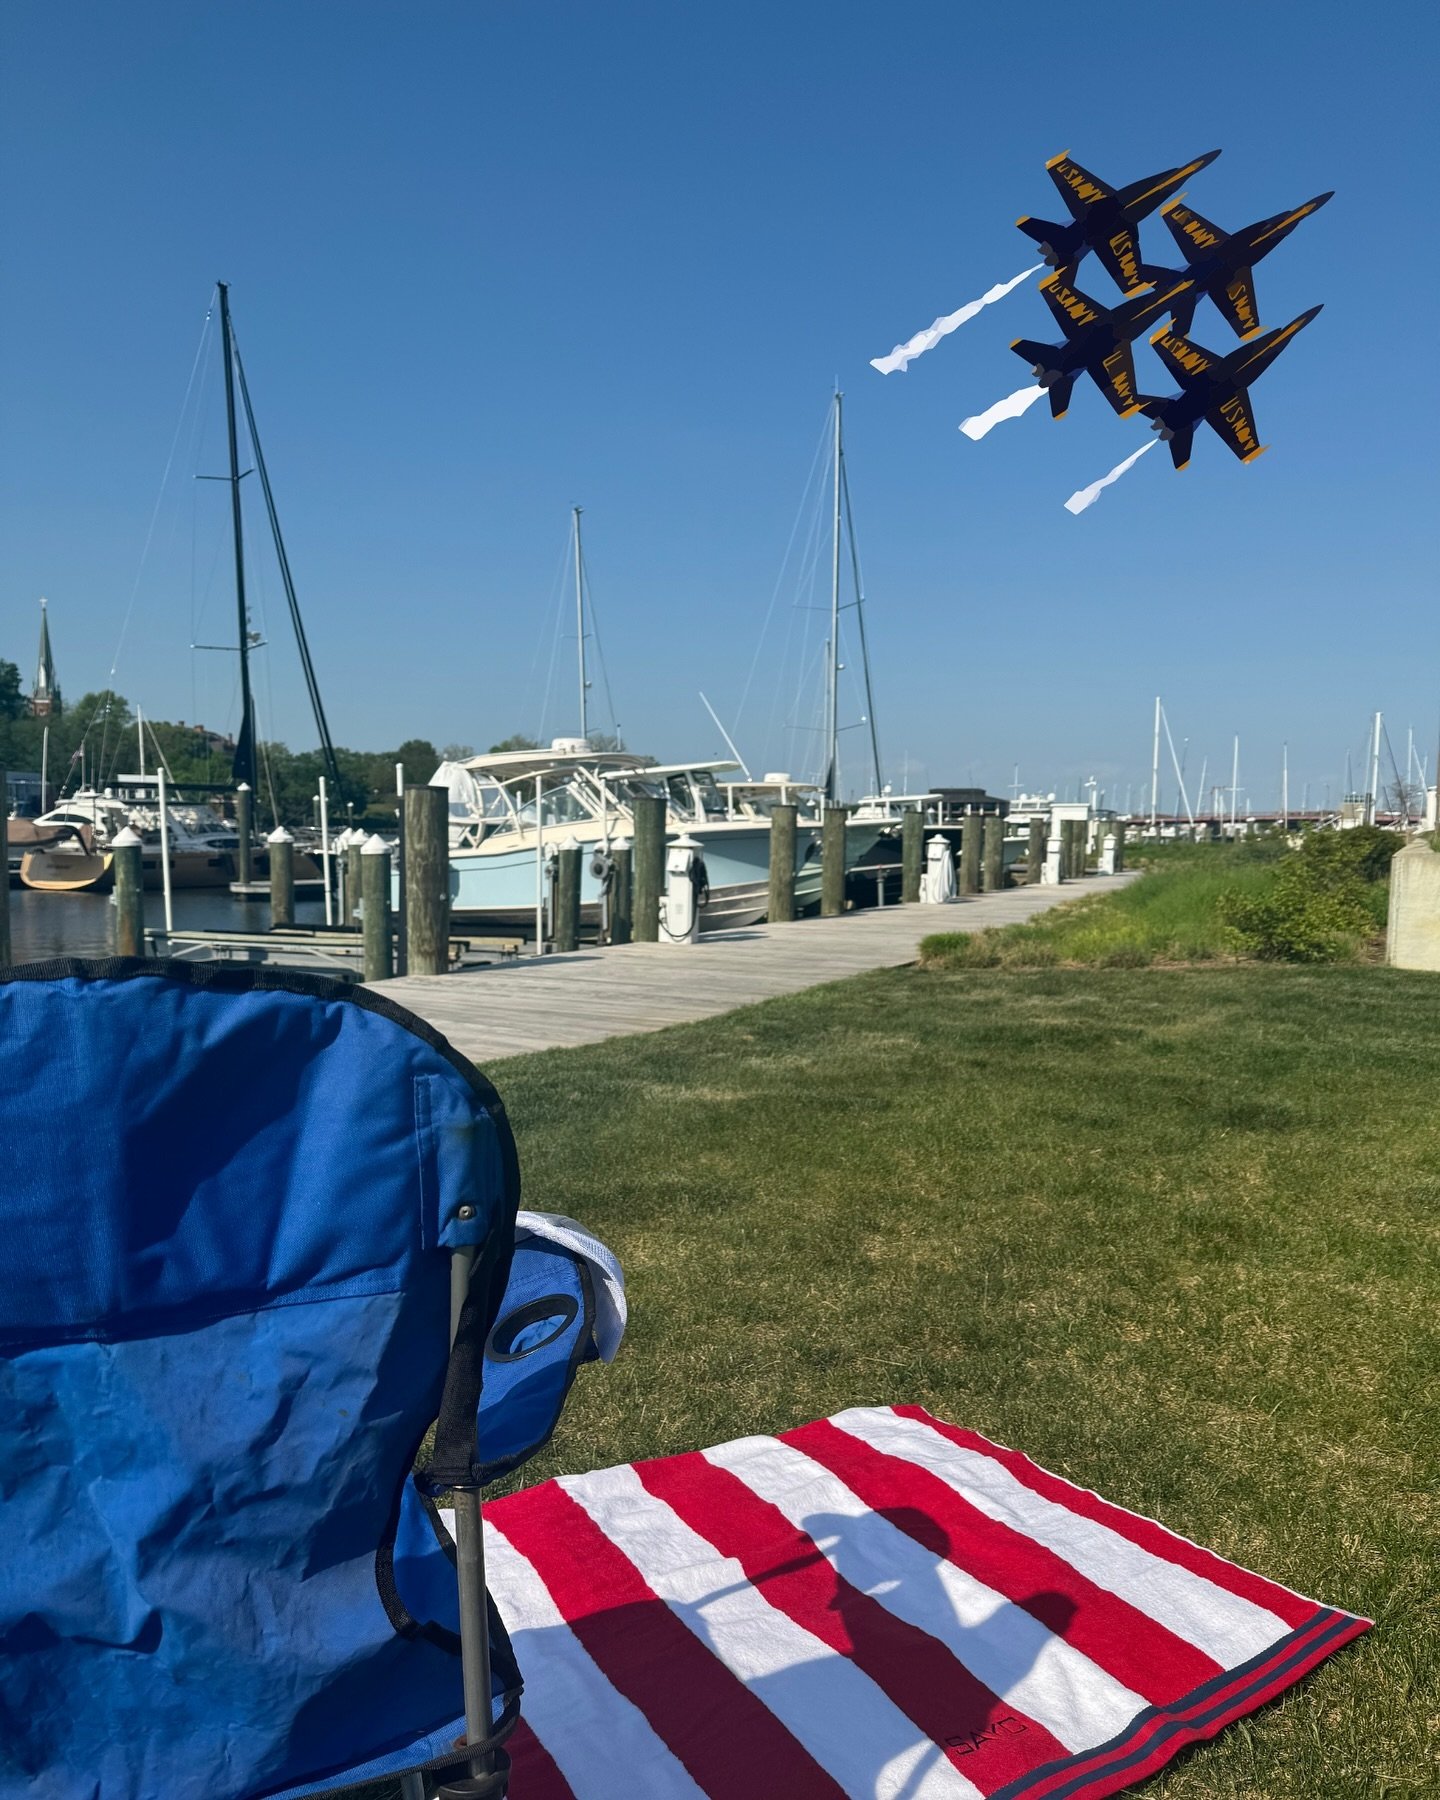 Hey Annapolis! The Blue Angels Air Show is two weeks away and we have the perfect viewing spot for you. 

Park at SAYC and join us on the Waterfront Lawn to see the show! 

Head over to our Facebook Event (link in bio) to let us know you&rsquo;re com